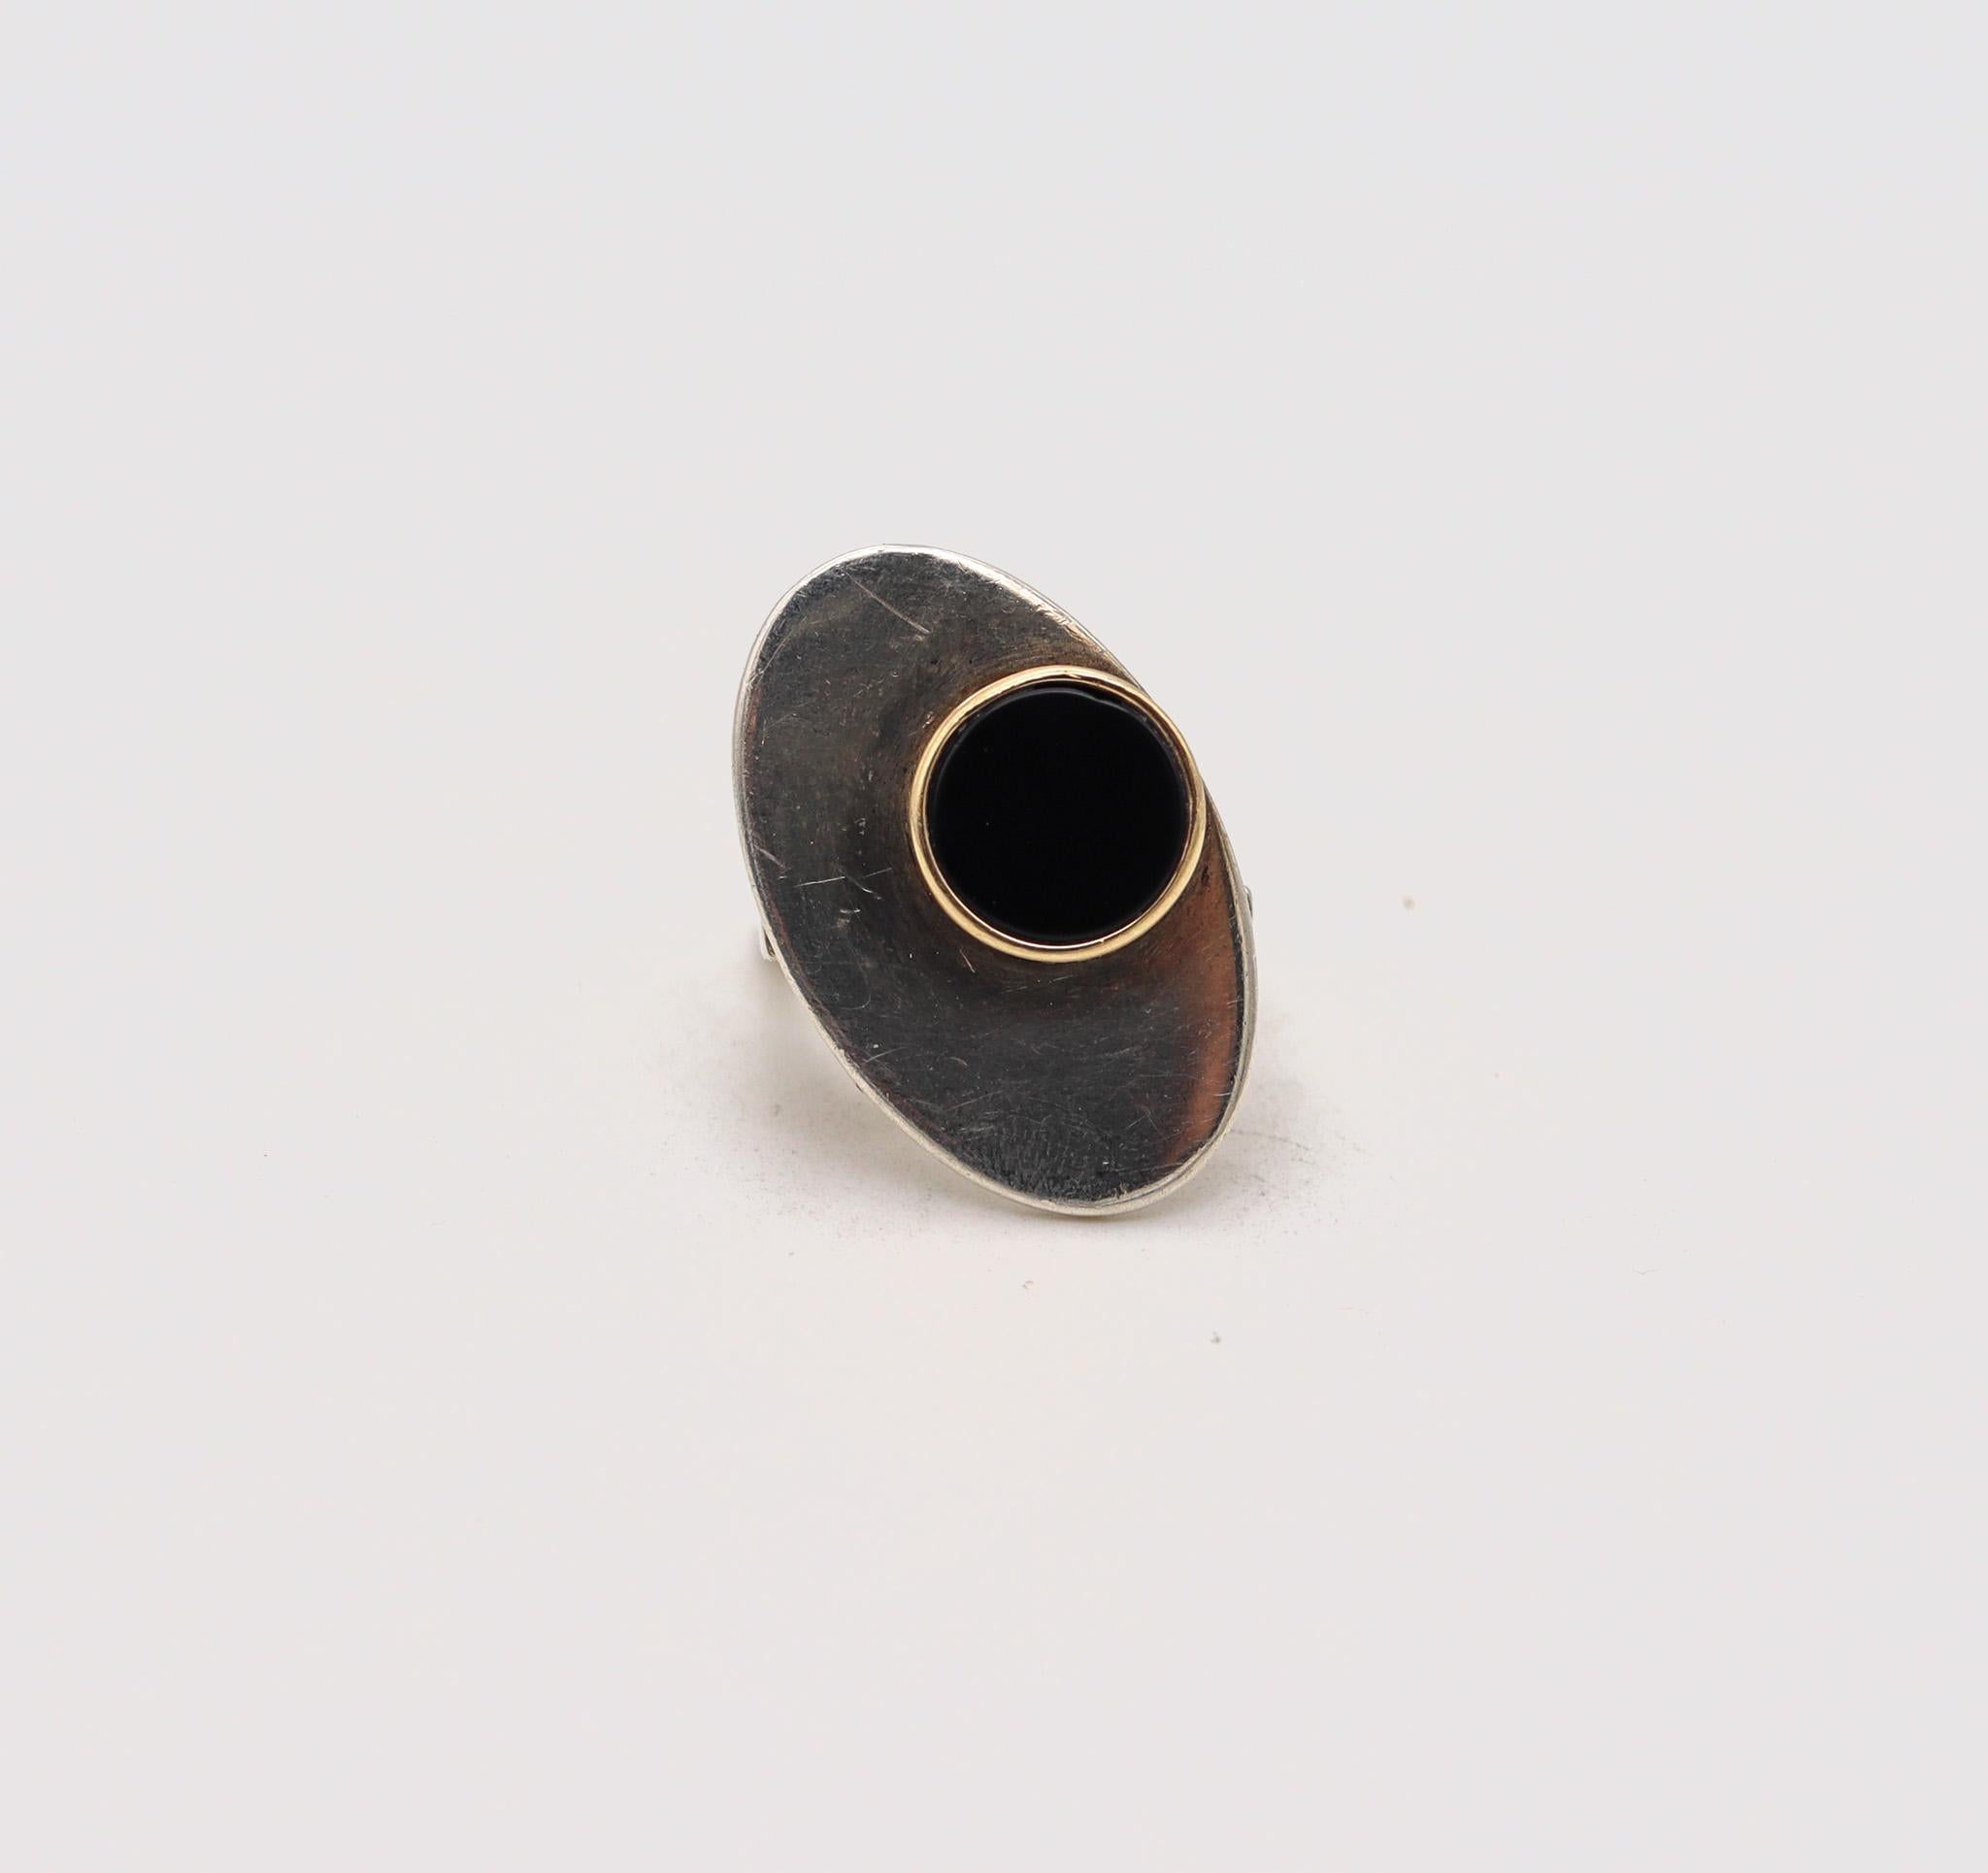 Modernist Pierre Cardin 1970 Paris Geometric Sculptural Onyx Ring 14kt Gold and Sterling For Sale